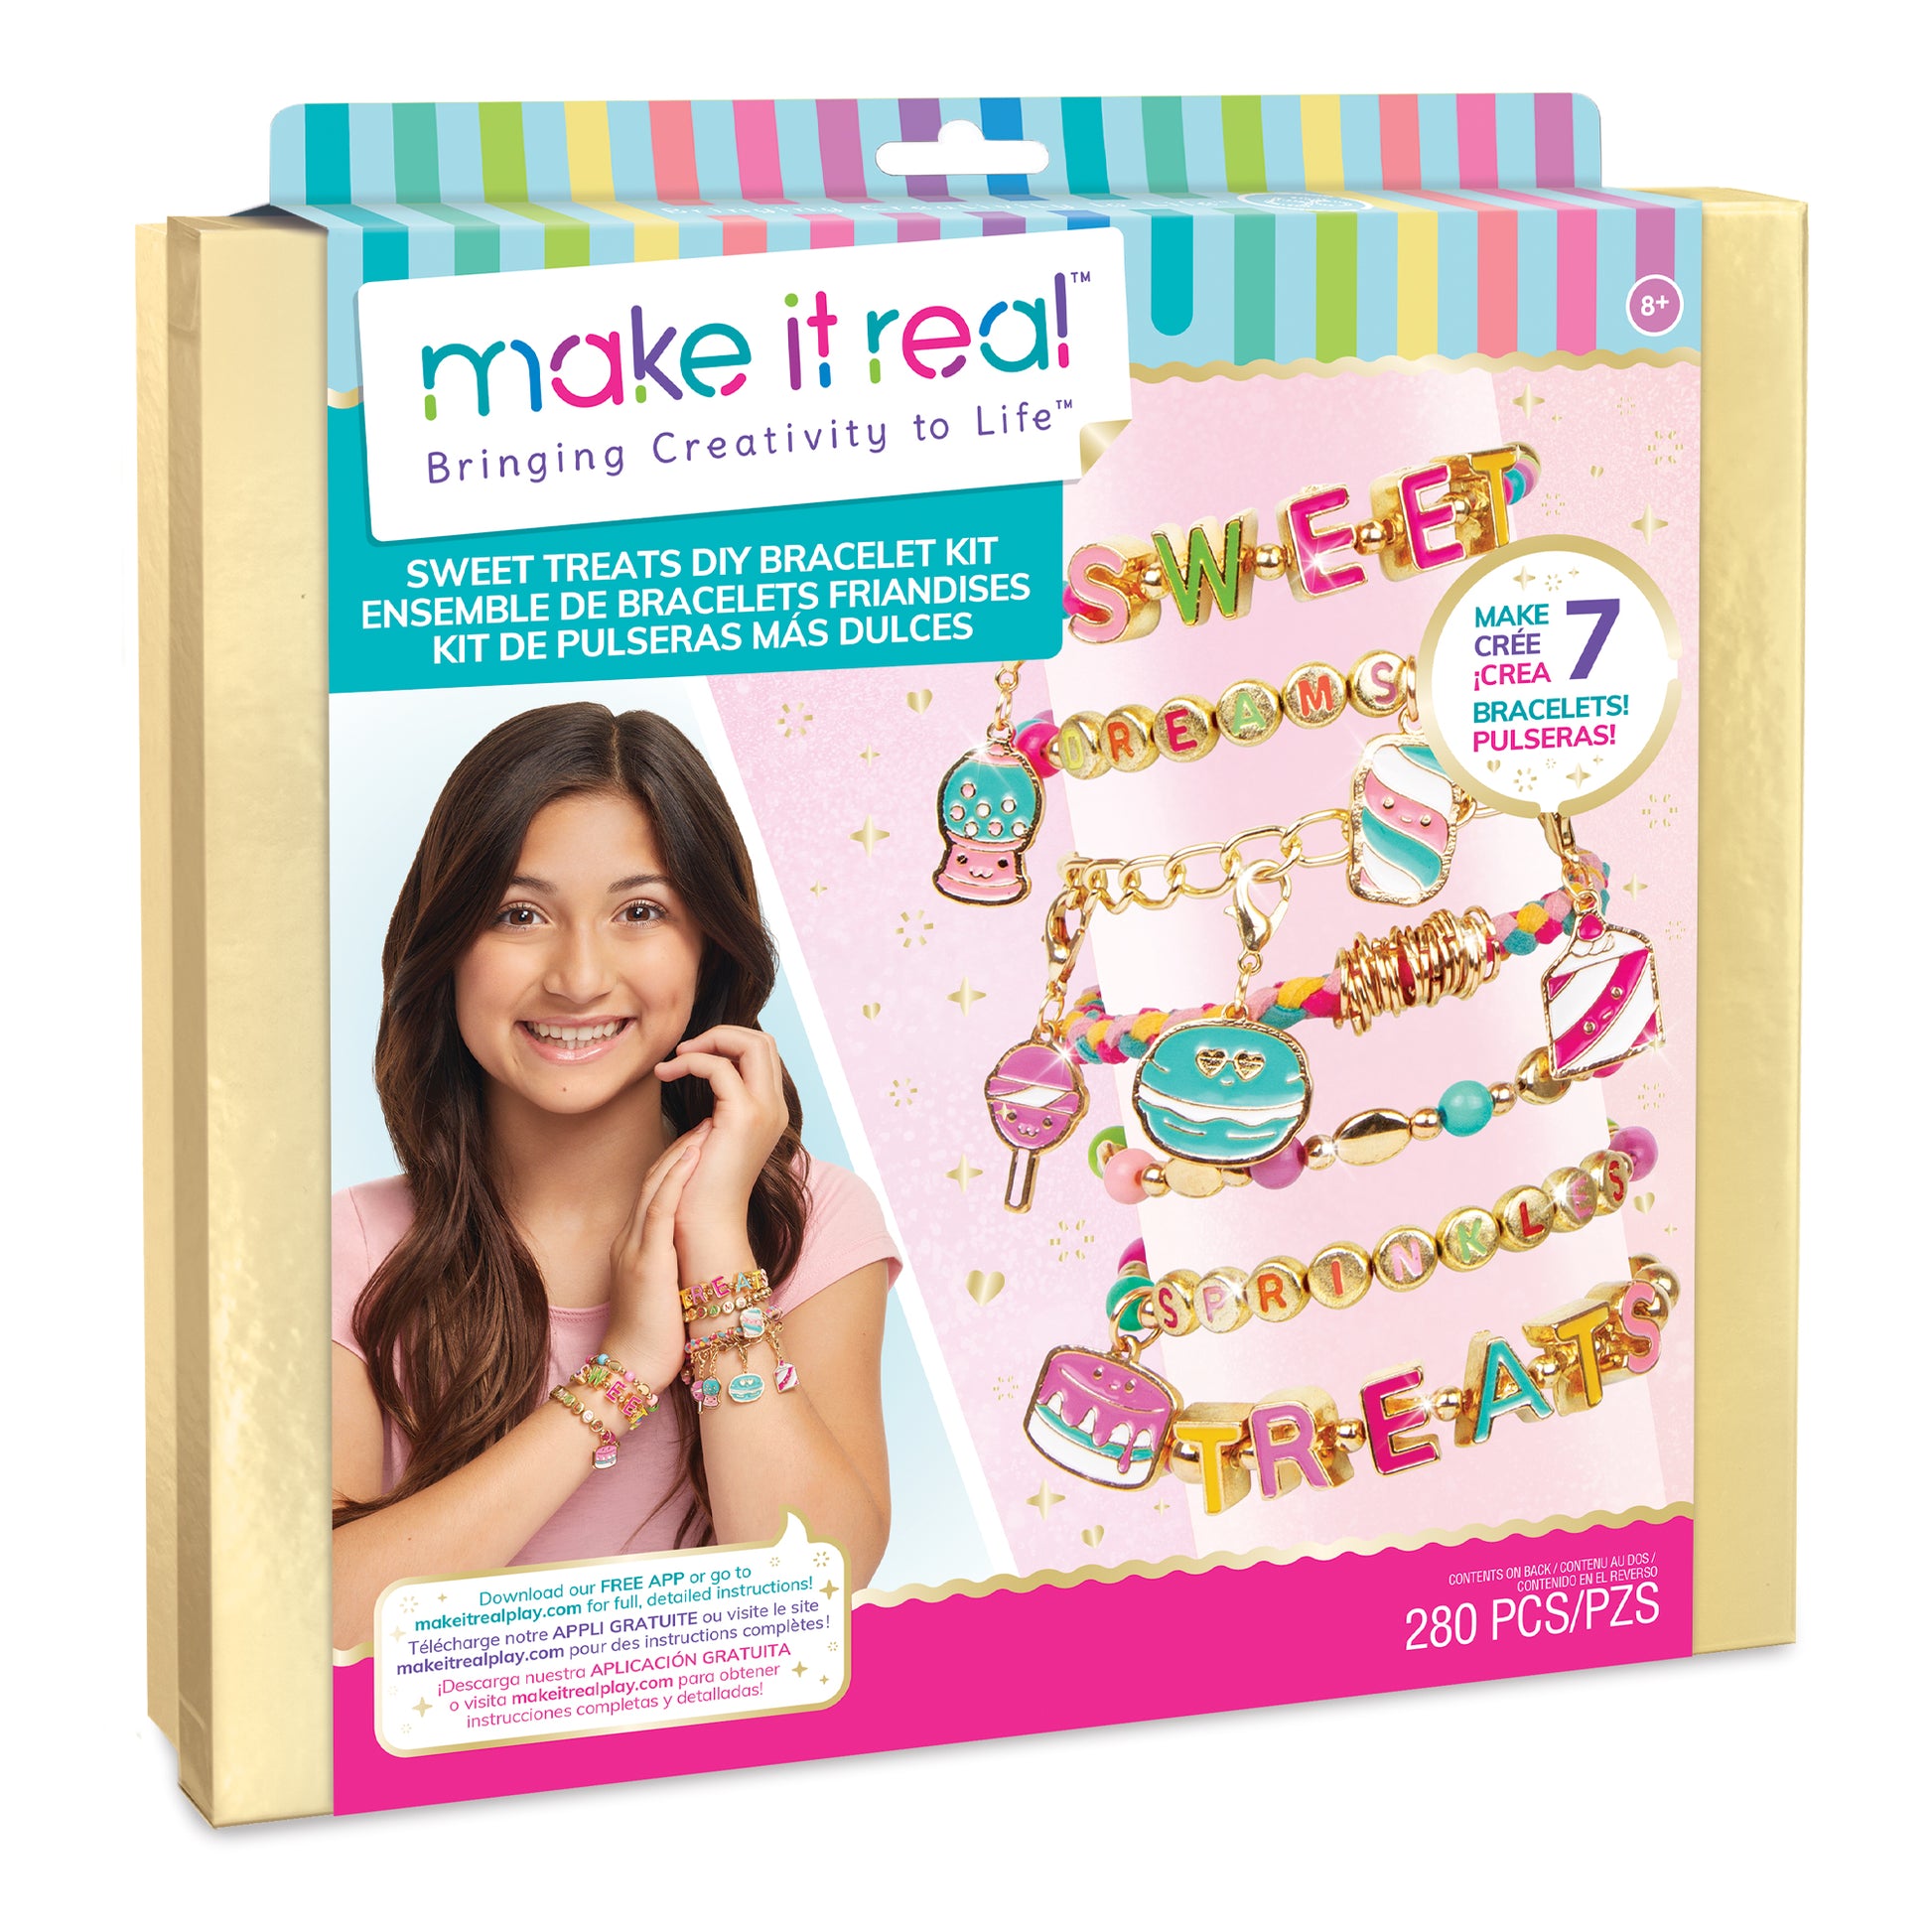 Make It Real: Bedazzled! Charm Bracelets Kit - Blooming Creativity - Create  3 Unique Bracelets, 104 Pieces, Includes Play Tray, All-in-One, DIY